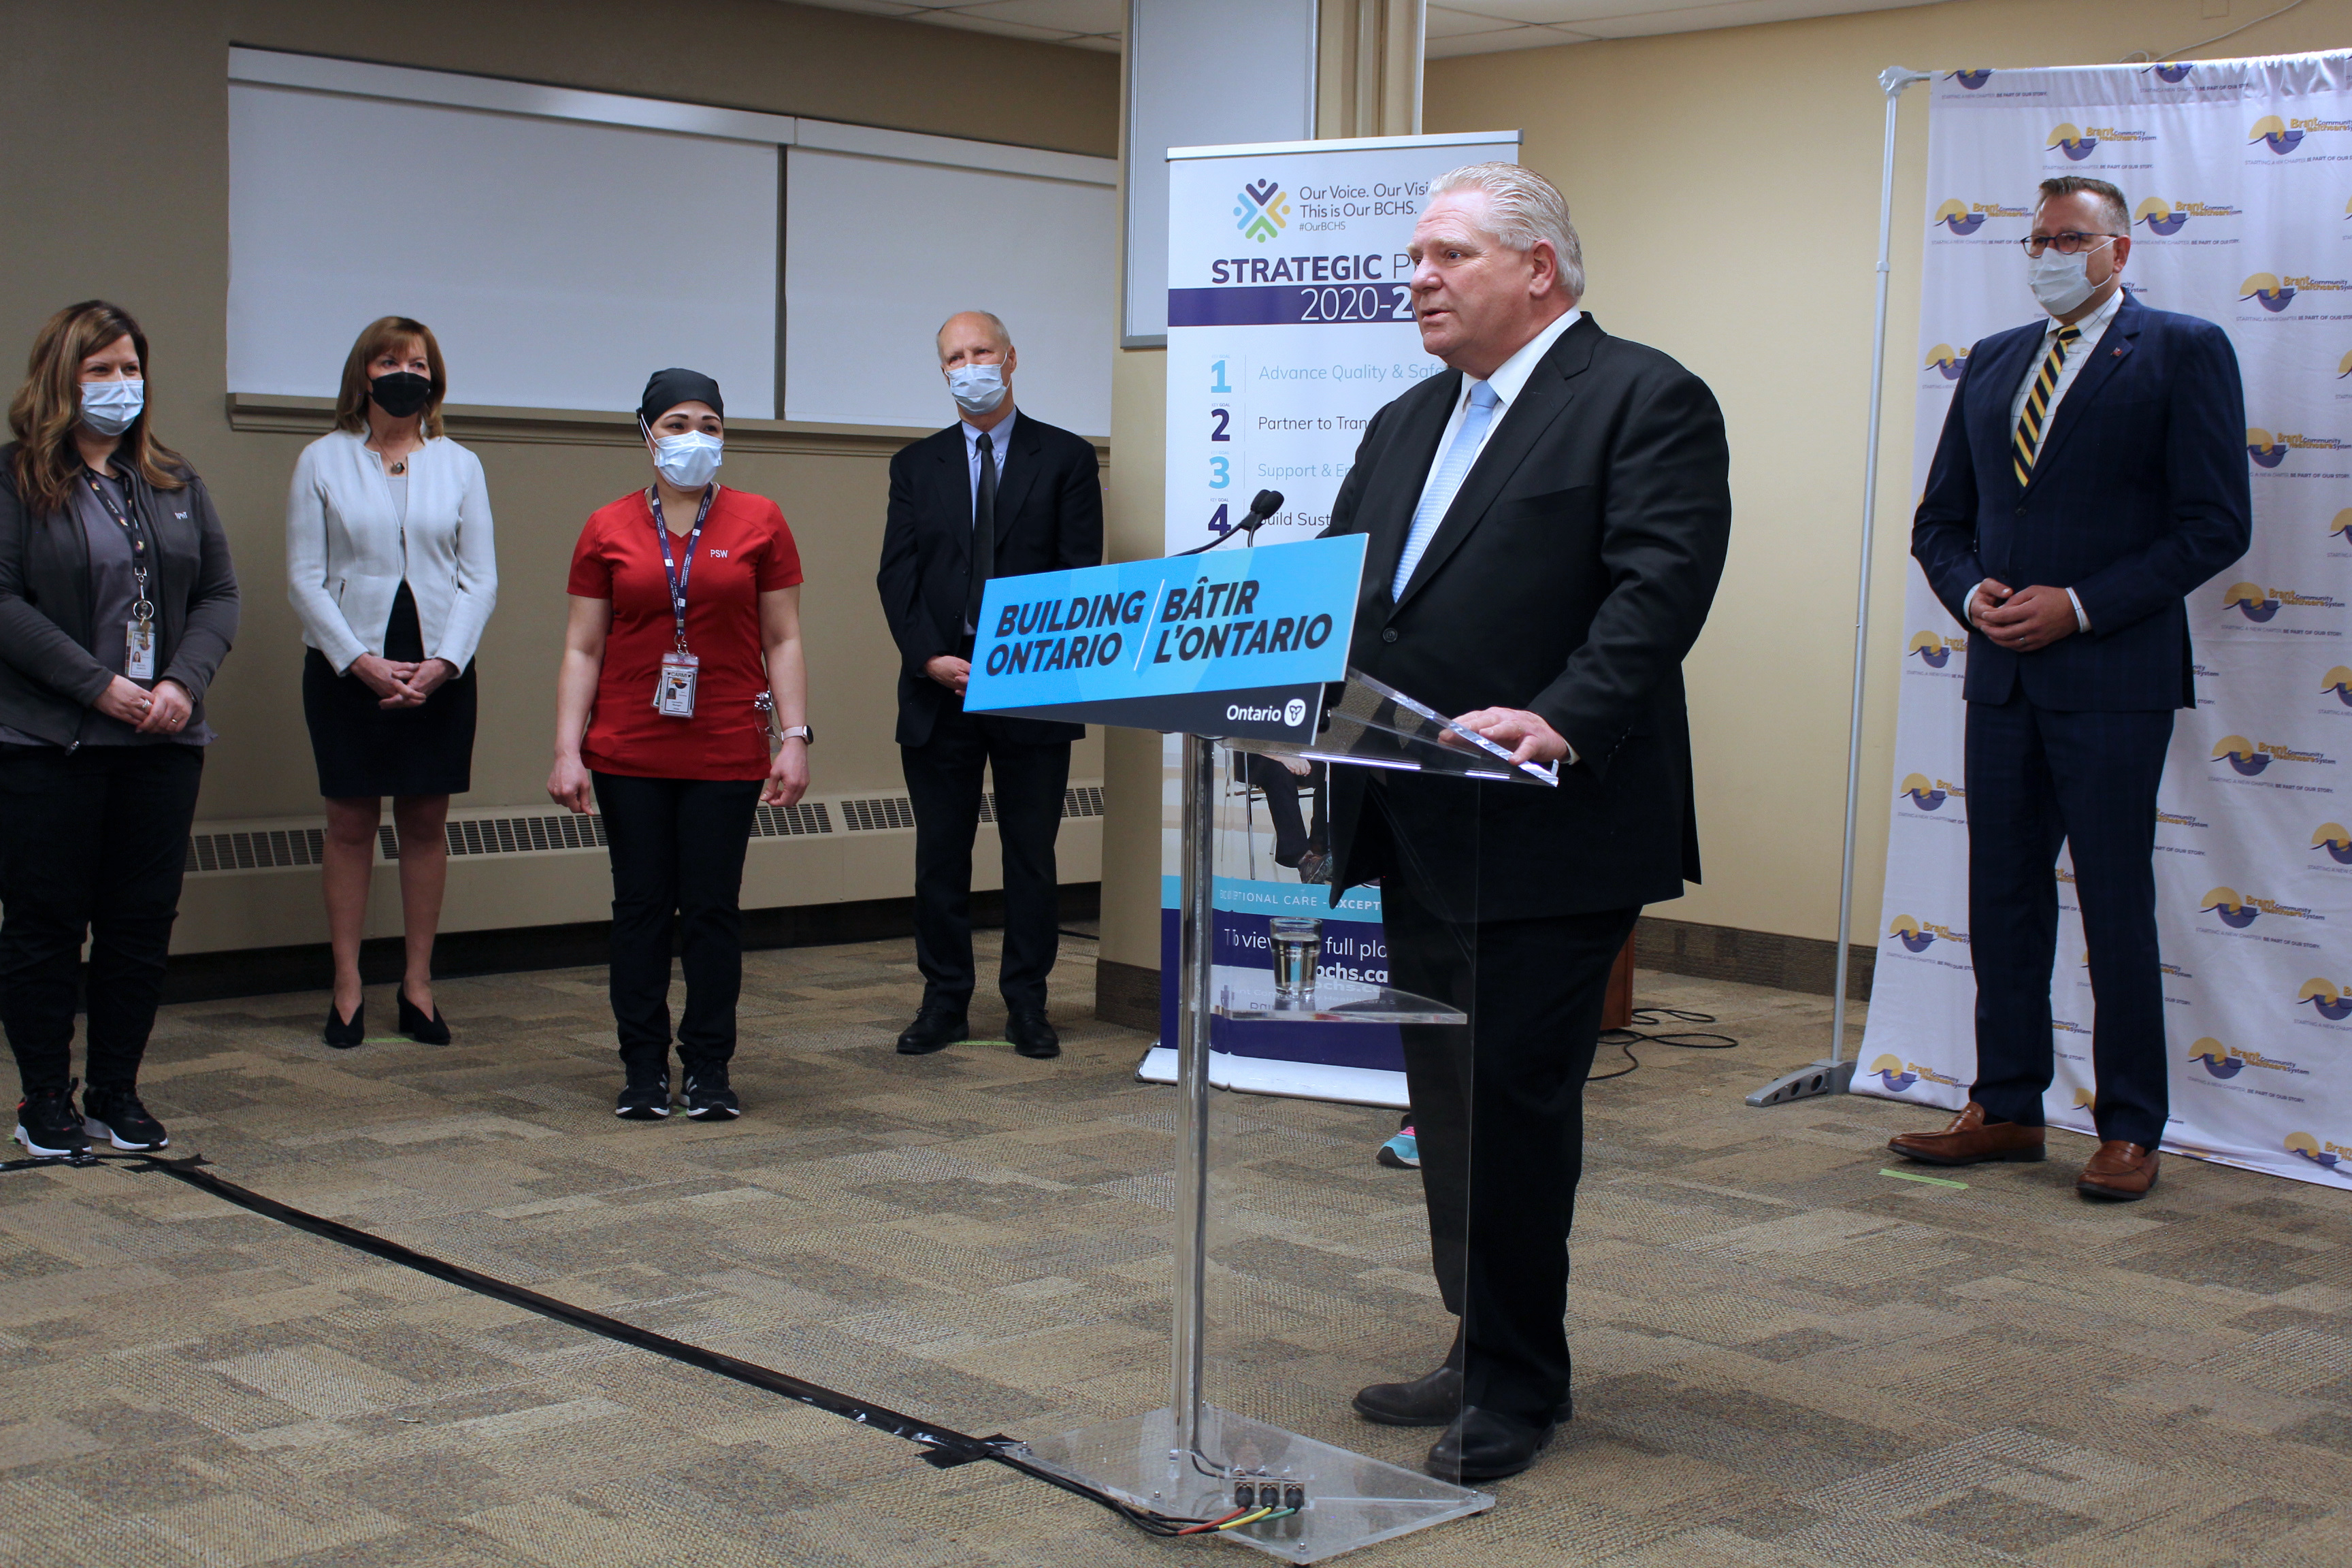 Doug Ford, Premier of Ontario, giving an announcement at BGH